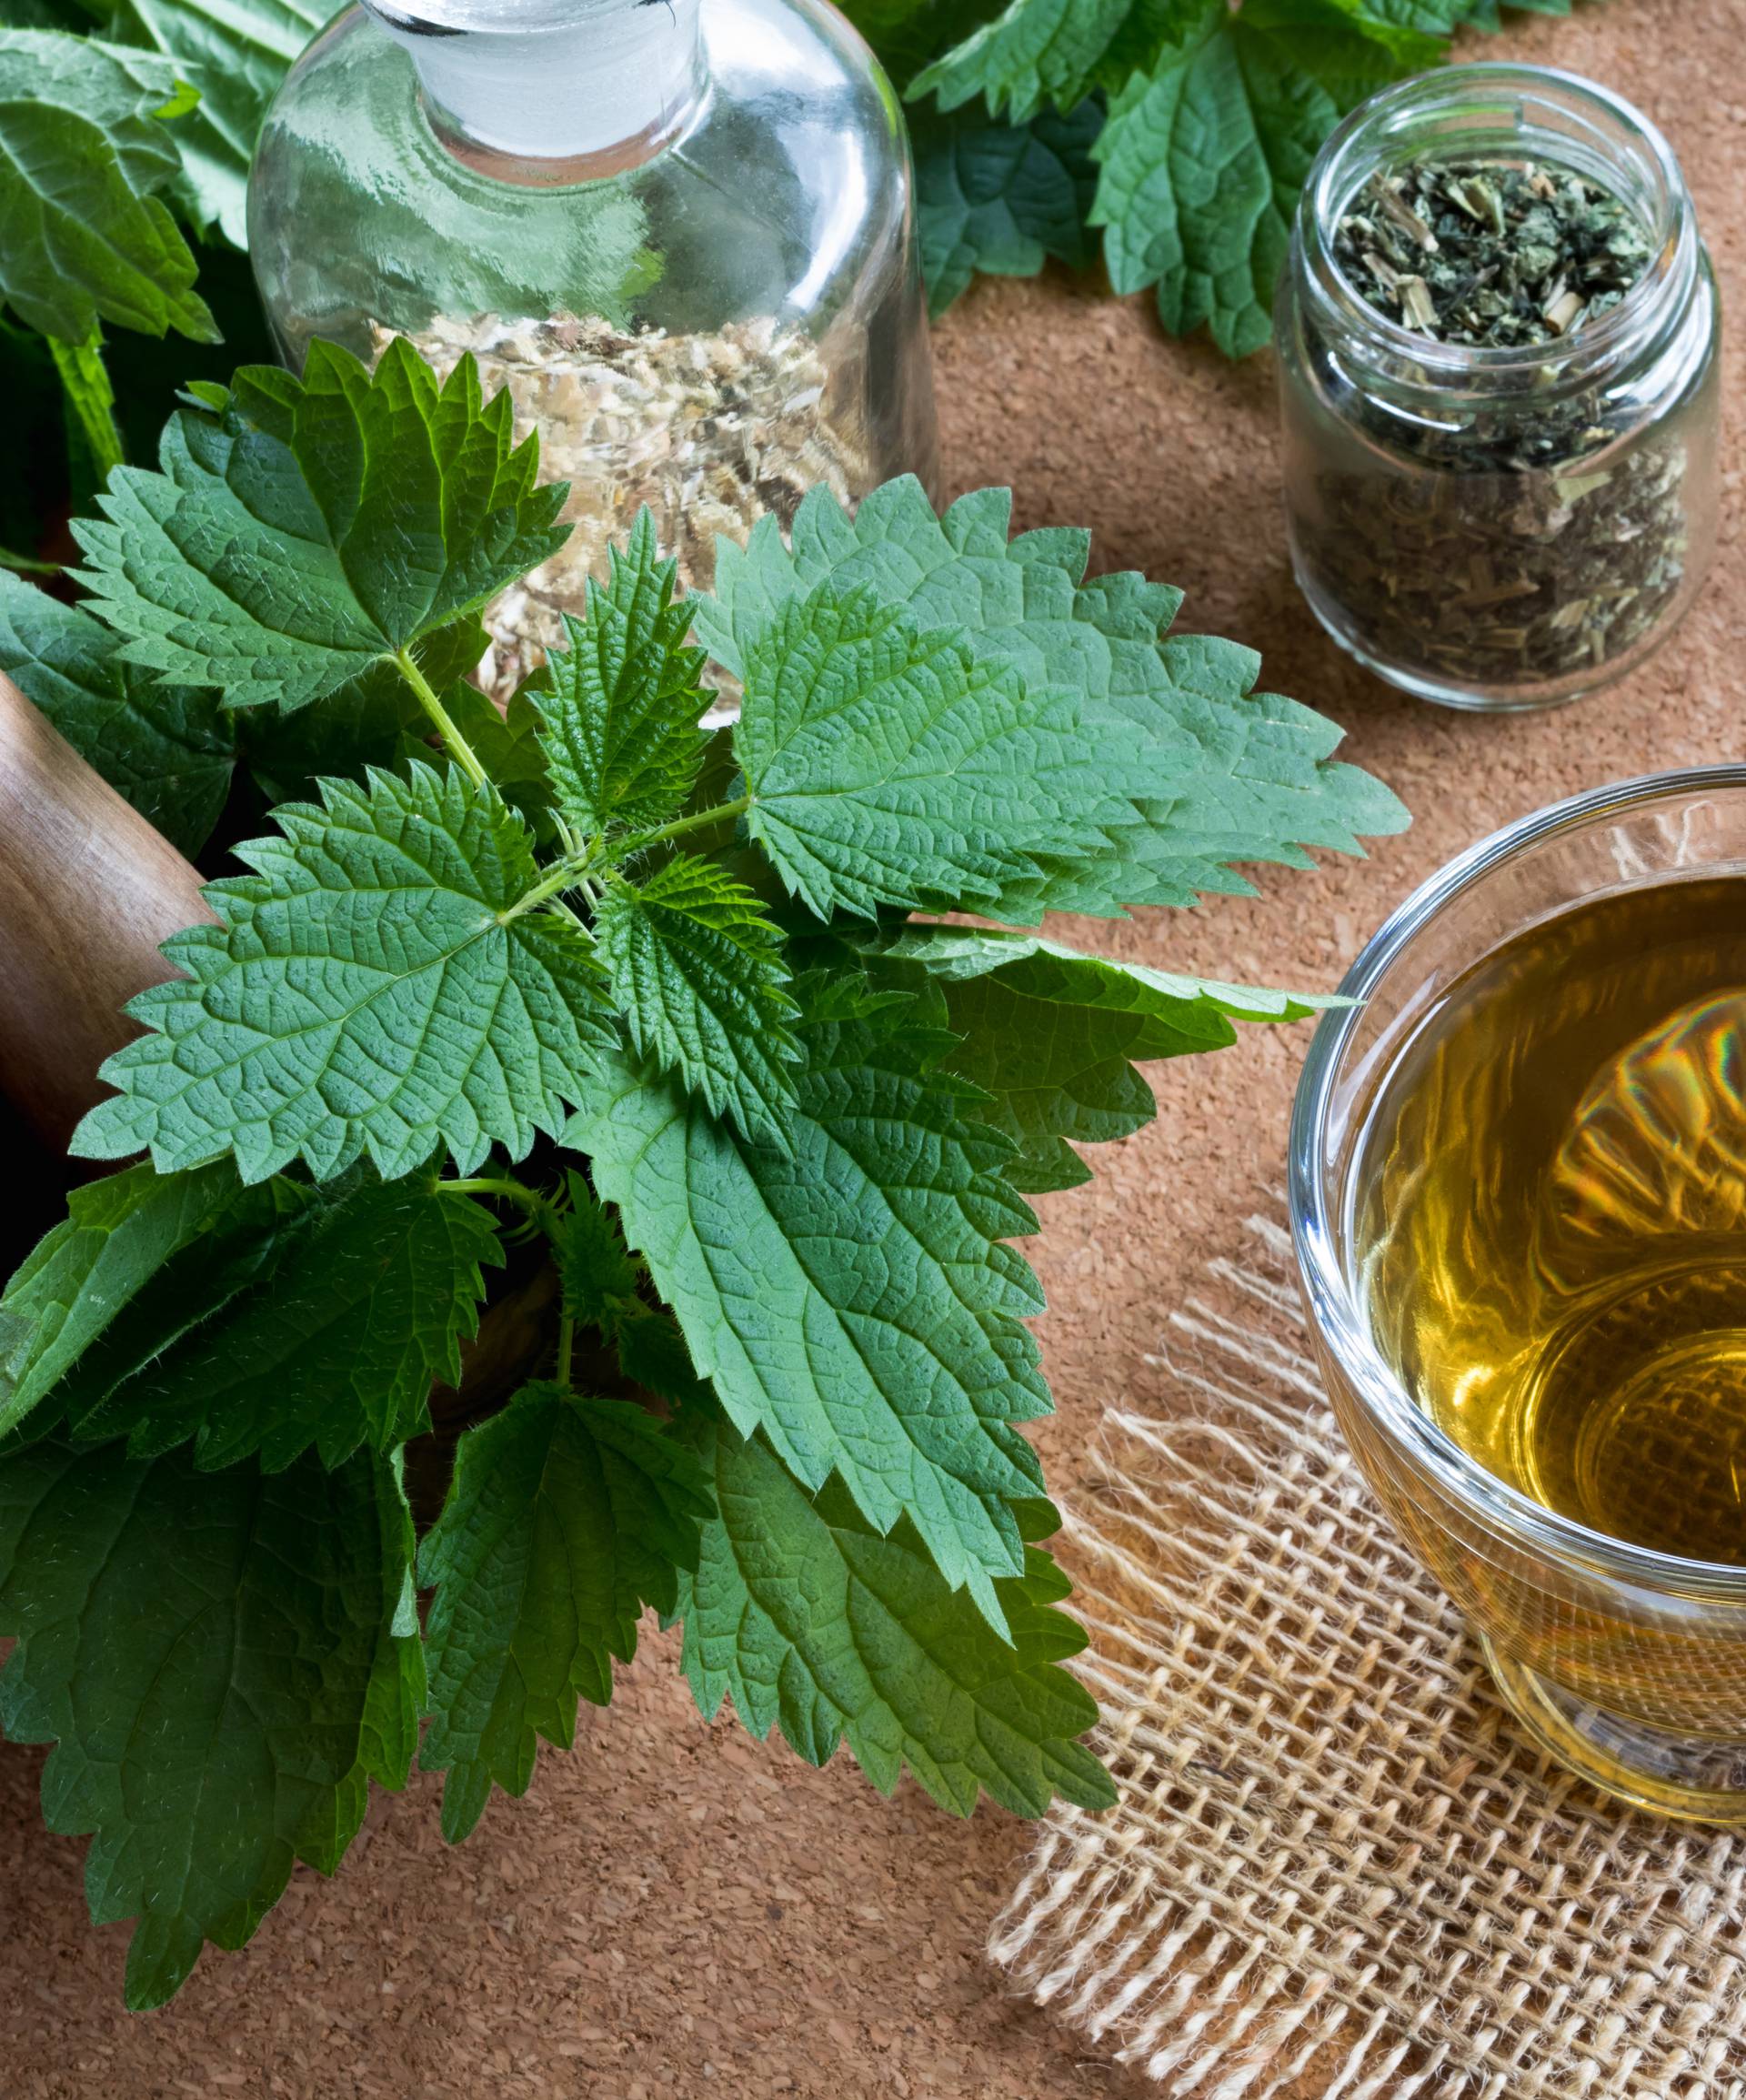 A cup of nettle tea with fresh and dry nettles